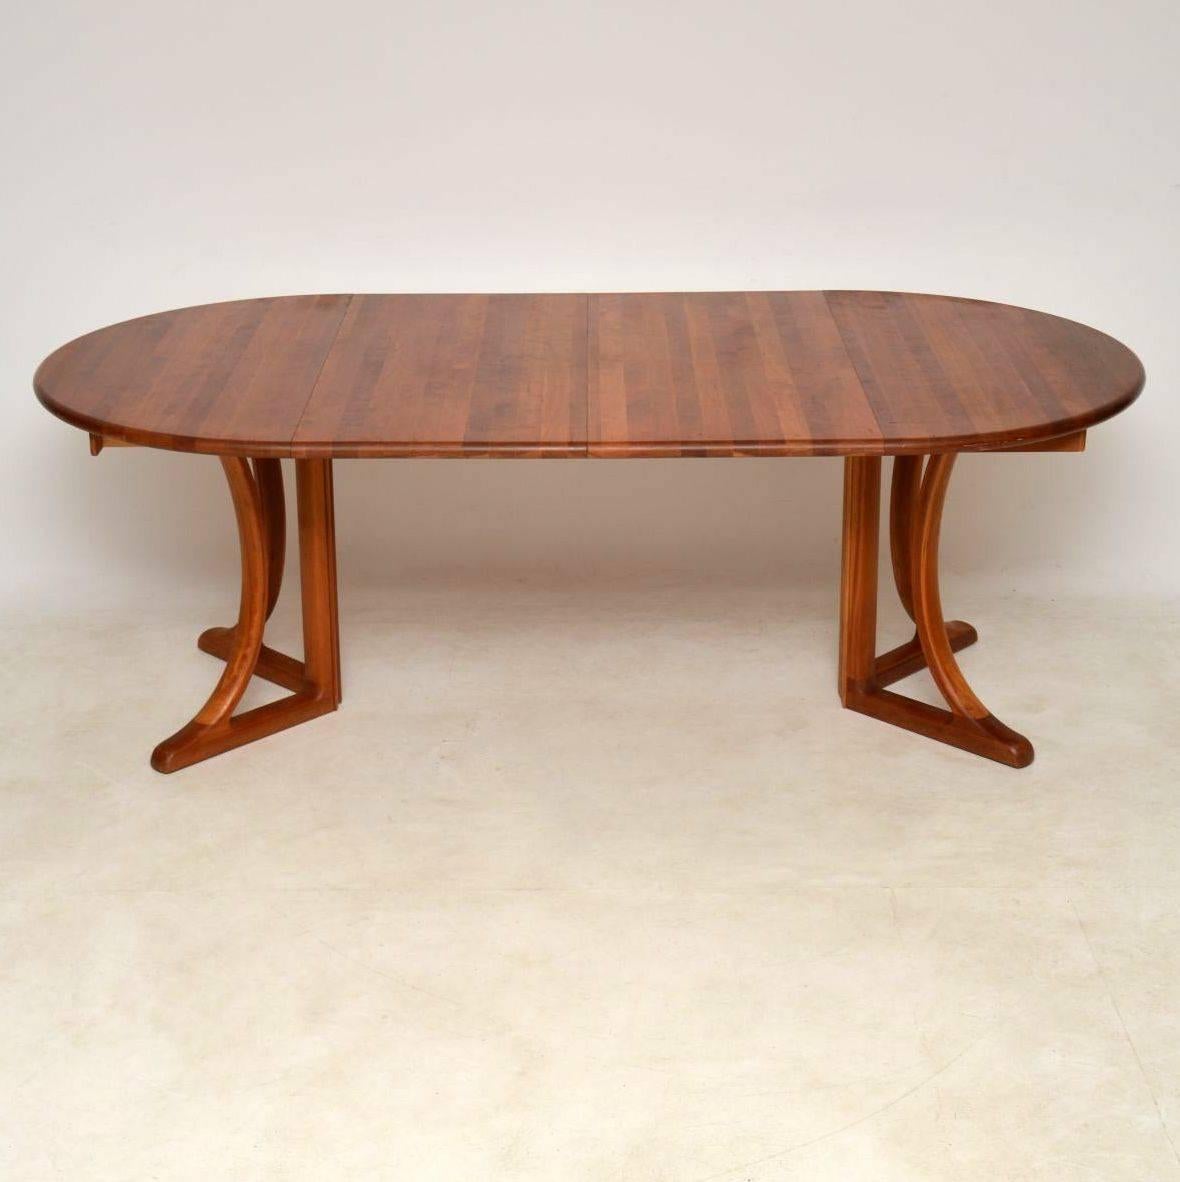 Mid-Century Modern 1960s Danish Teak Dining Table and Chairs by Niels Koefoed